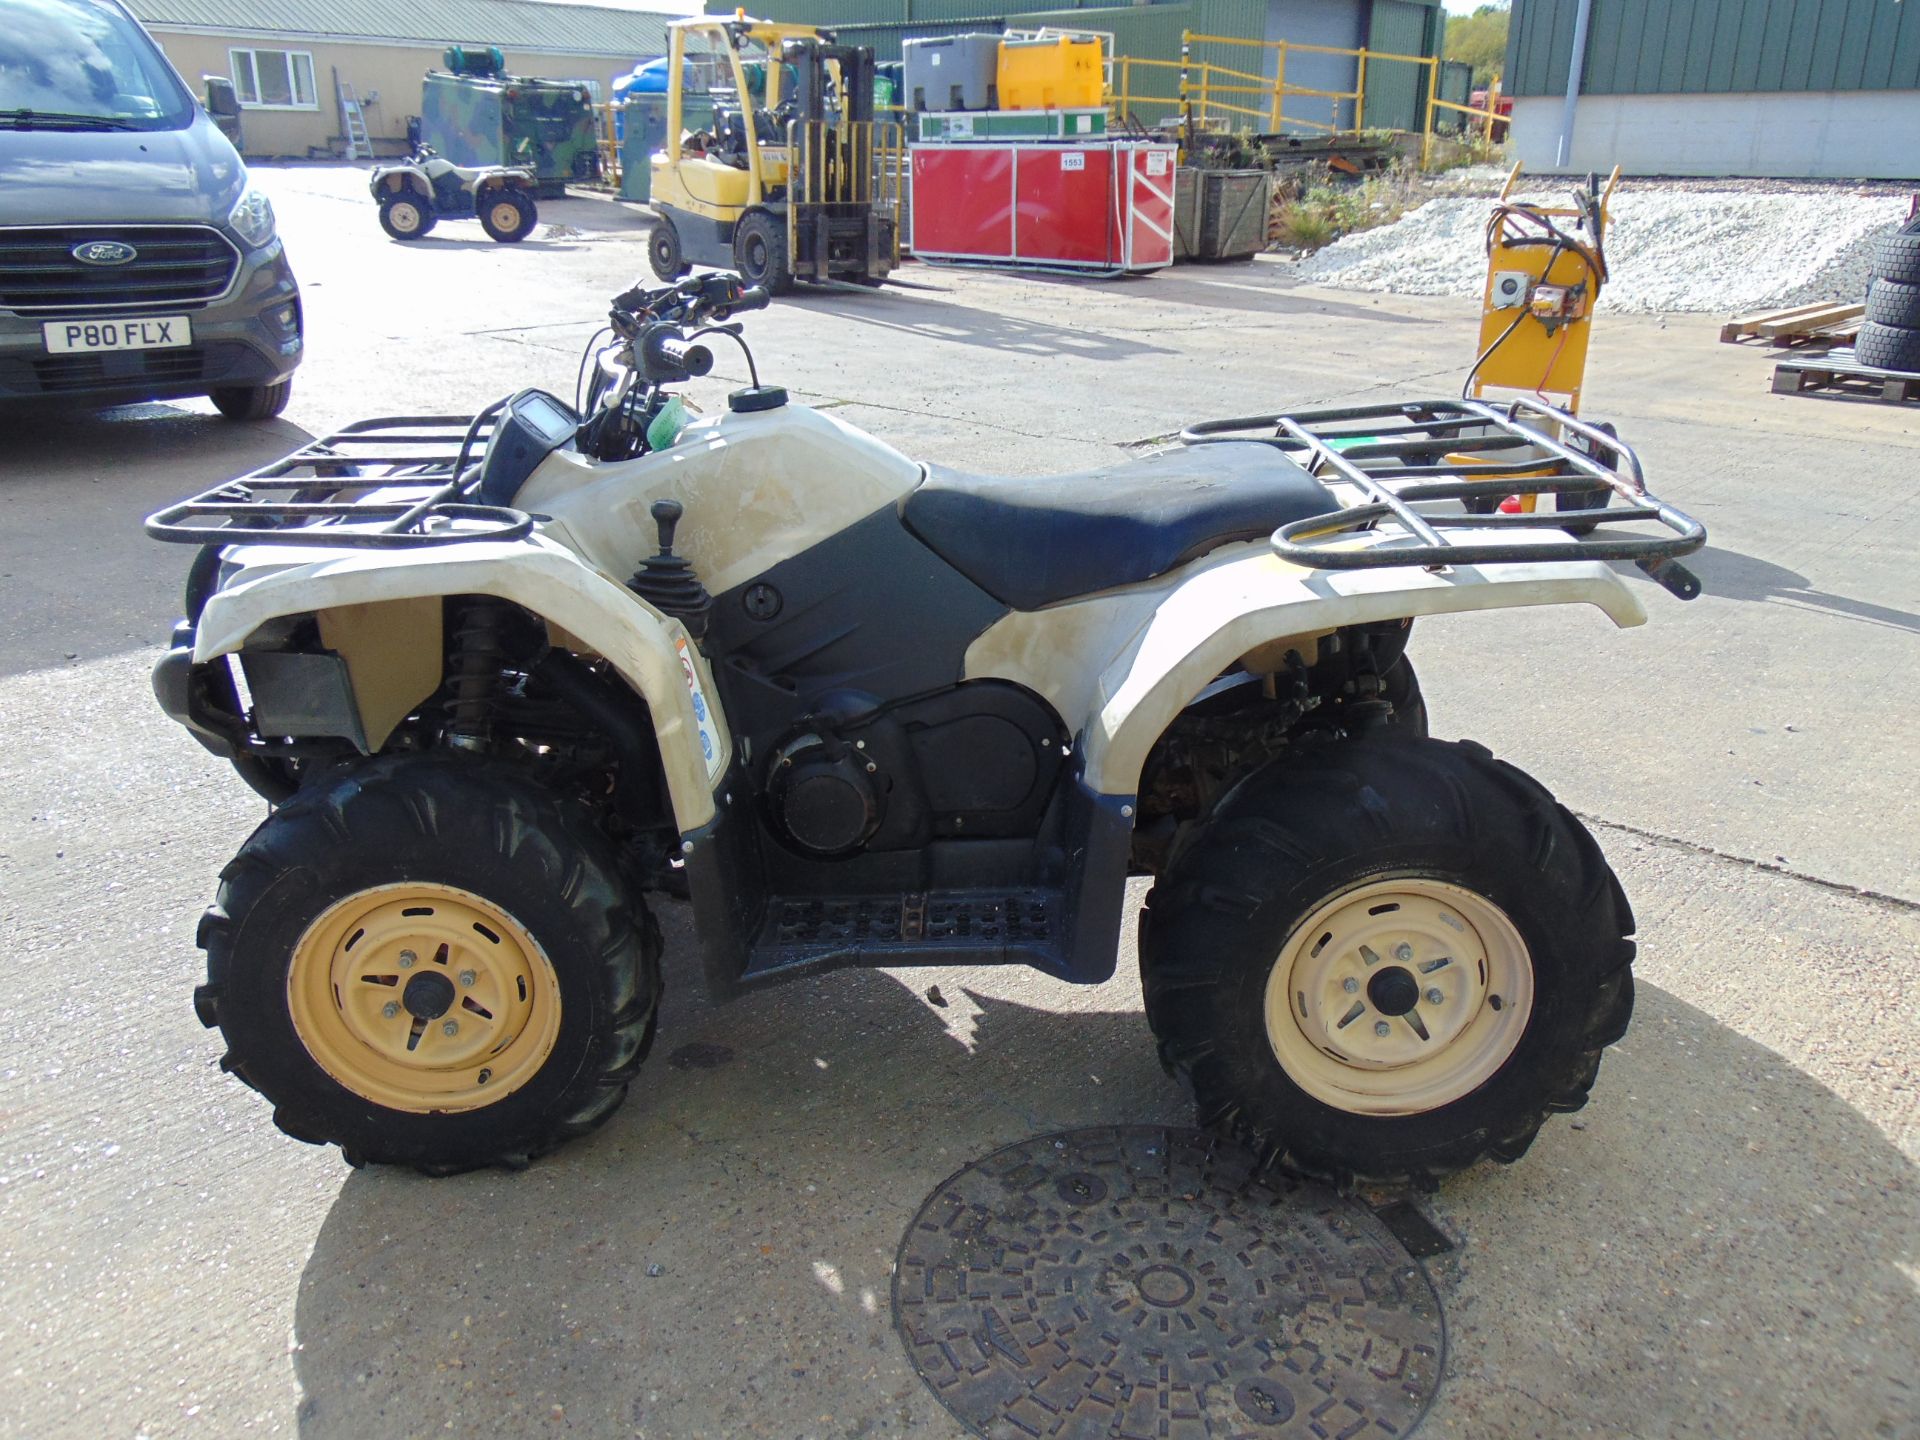 Military Specification Yamaha Grizzly 450 4 x 4 ATV Quad Bike - Image 4 of 16